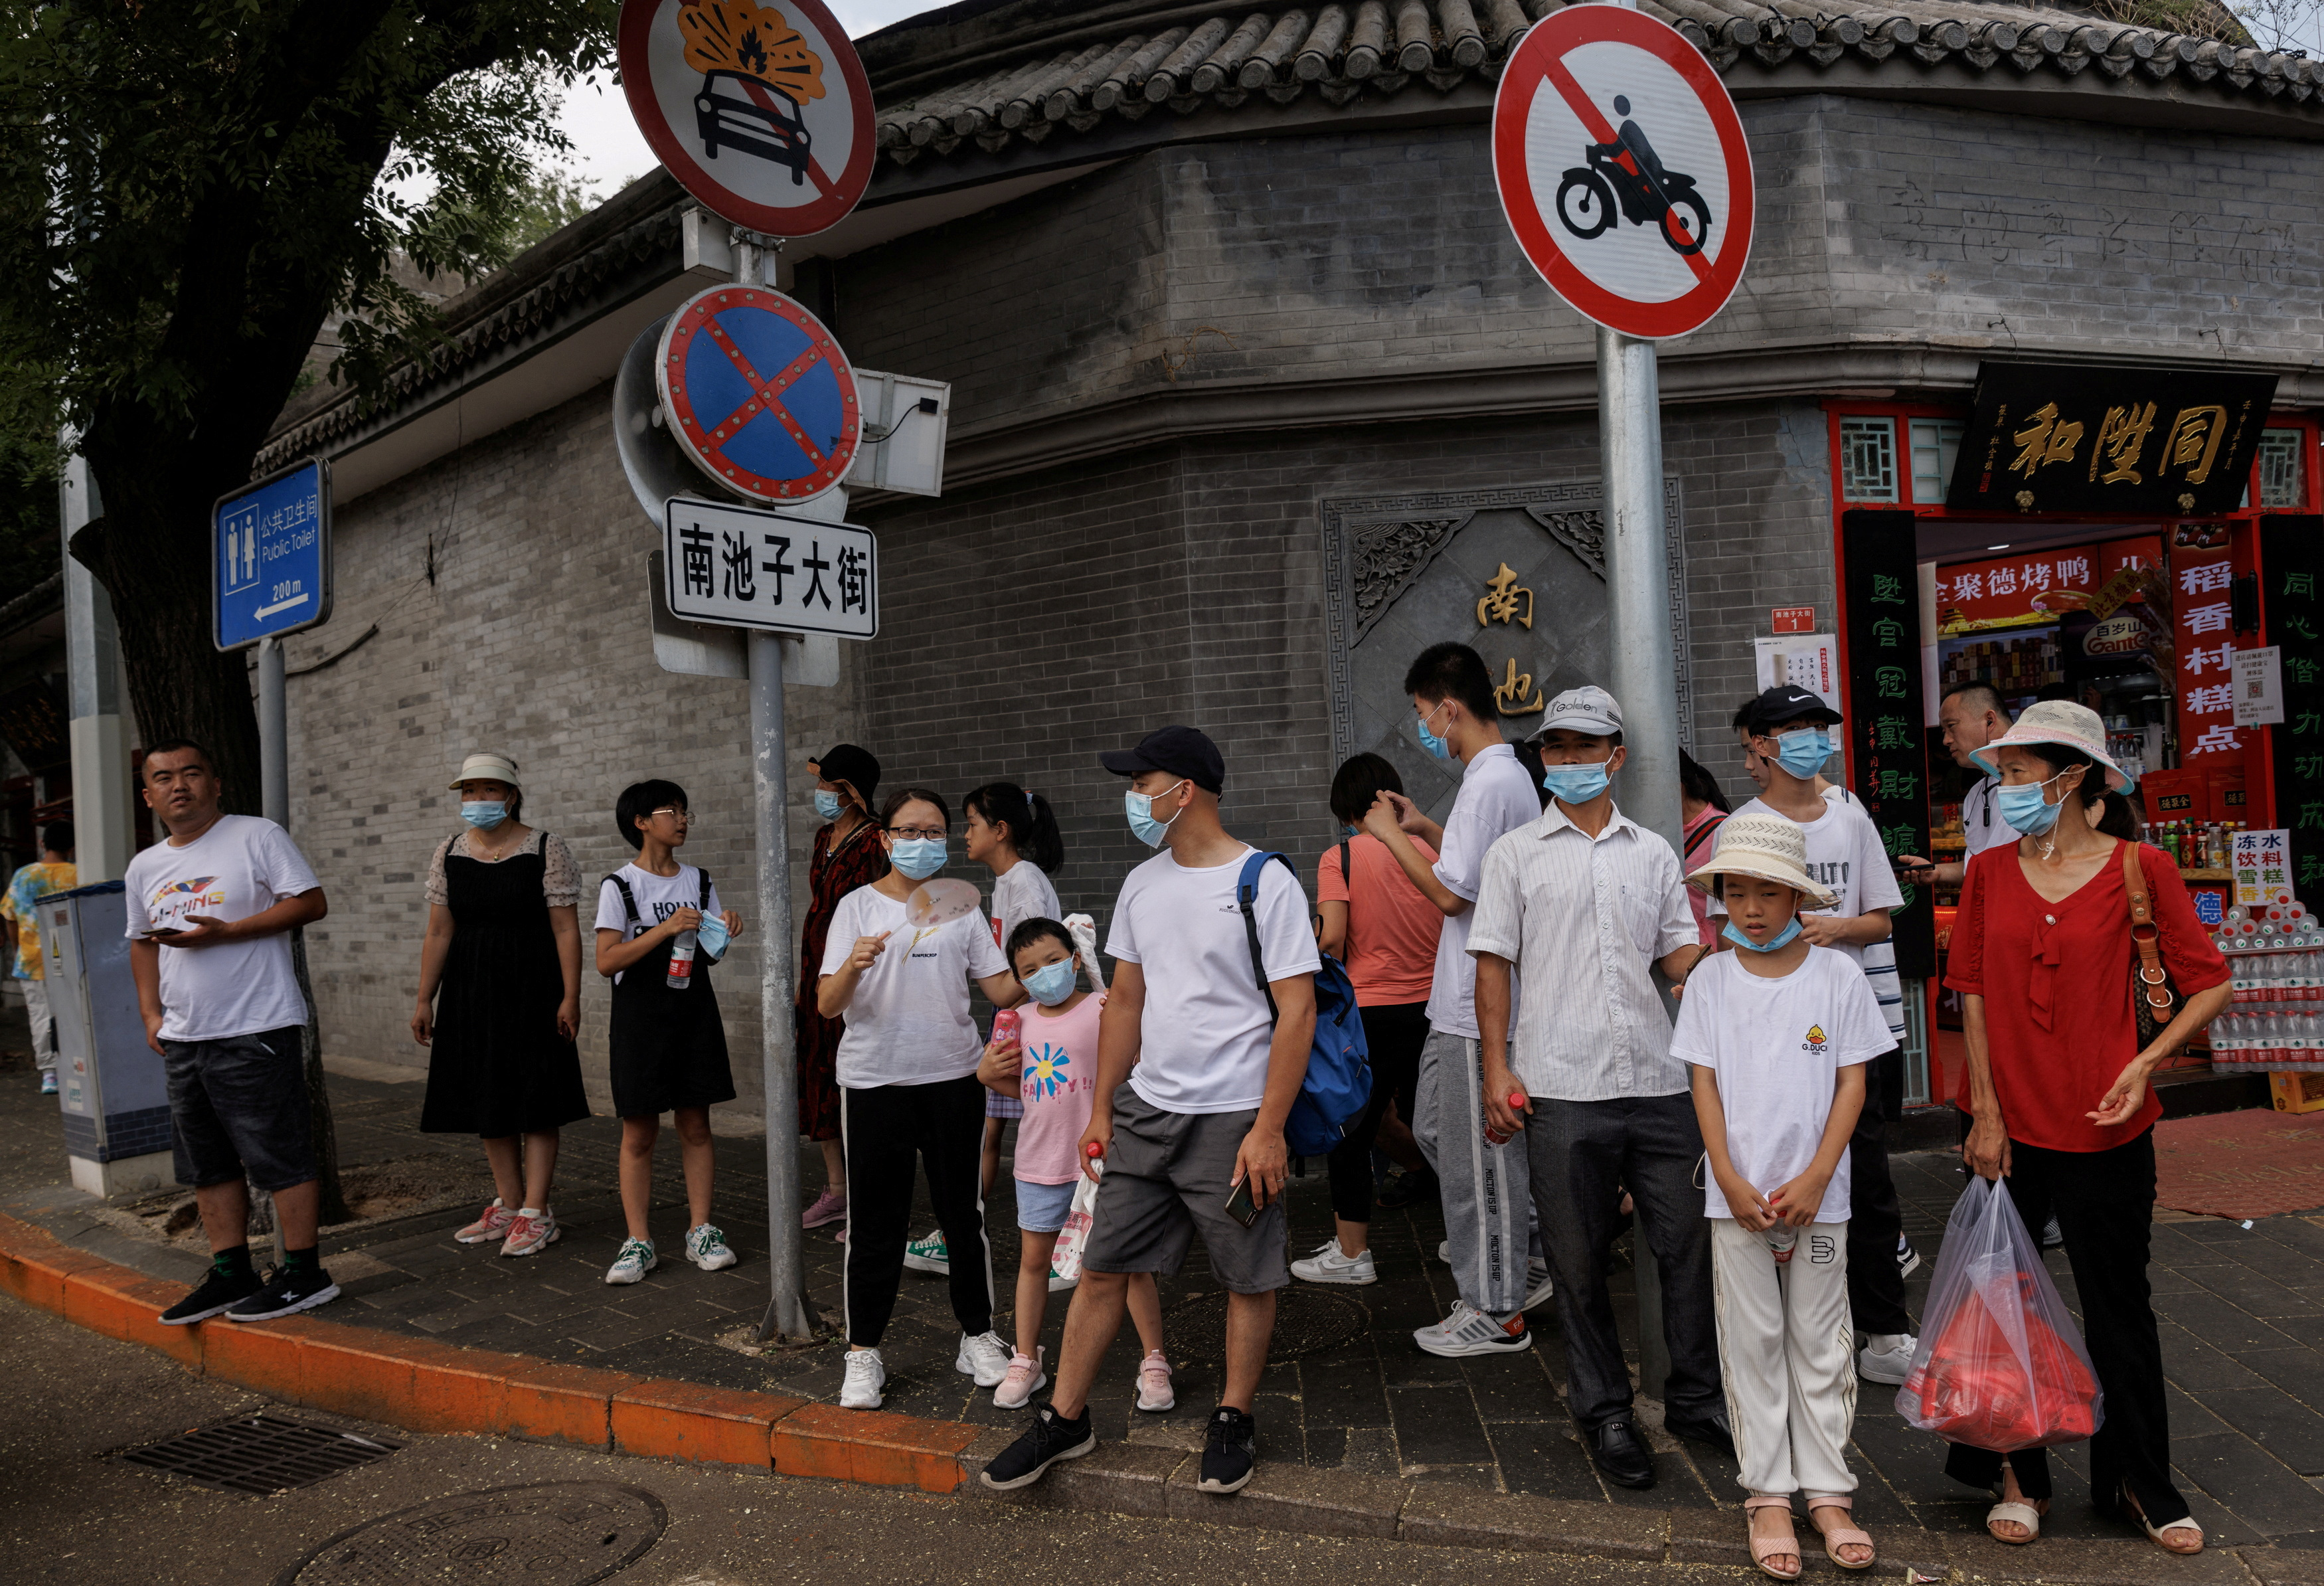 Several cities in China add COVID curbs as millions still under lockdown | Reuters